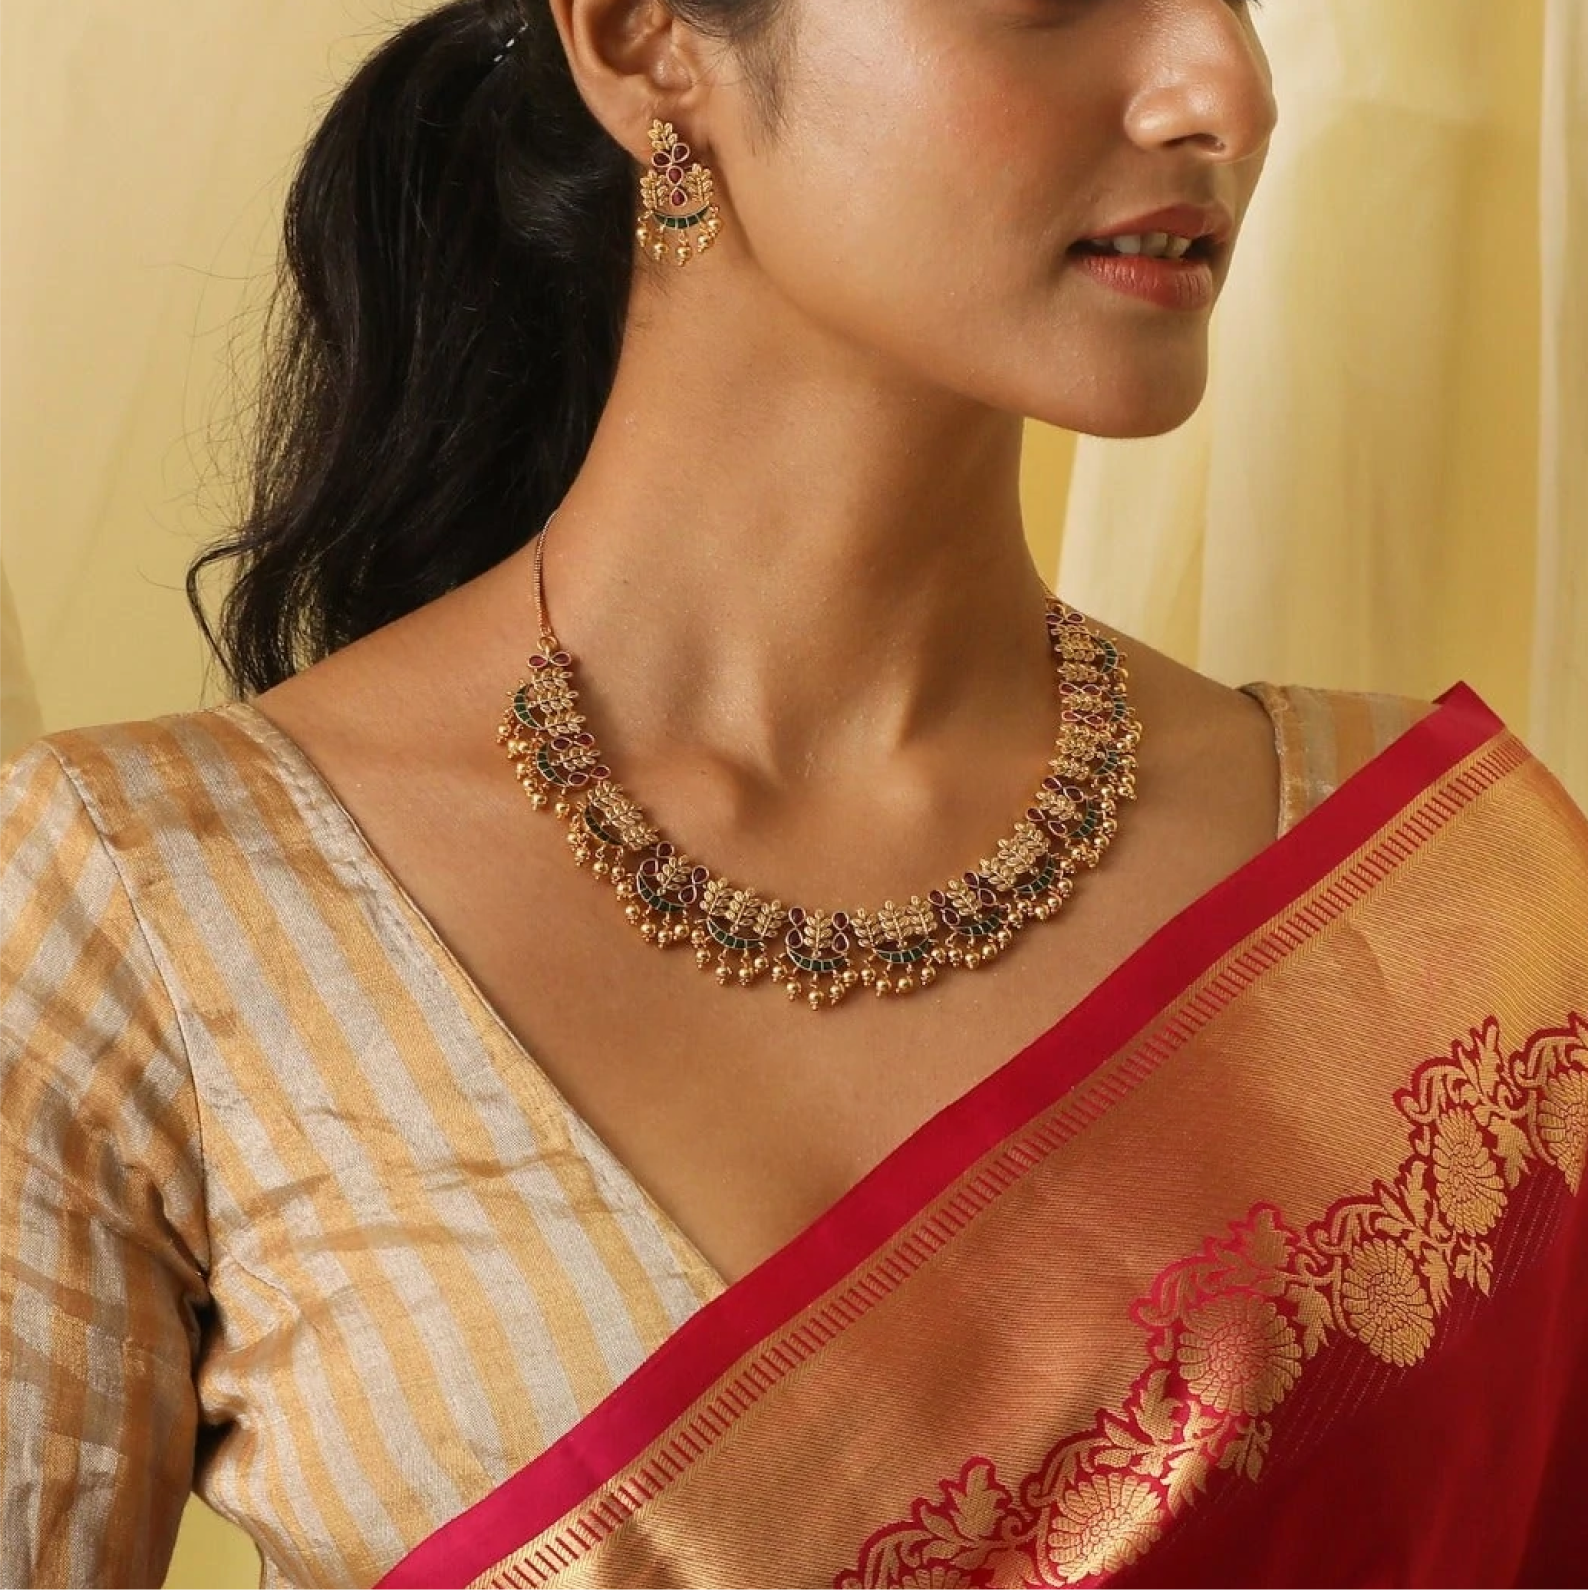 model wearing a matching gold necklace and earring set with ruby gems